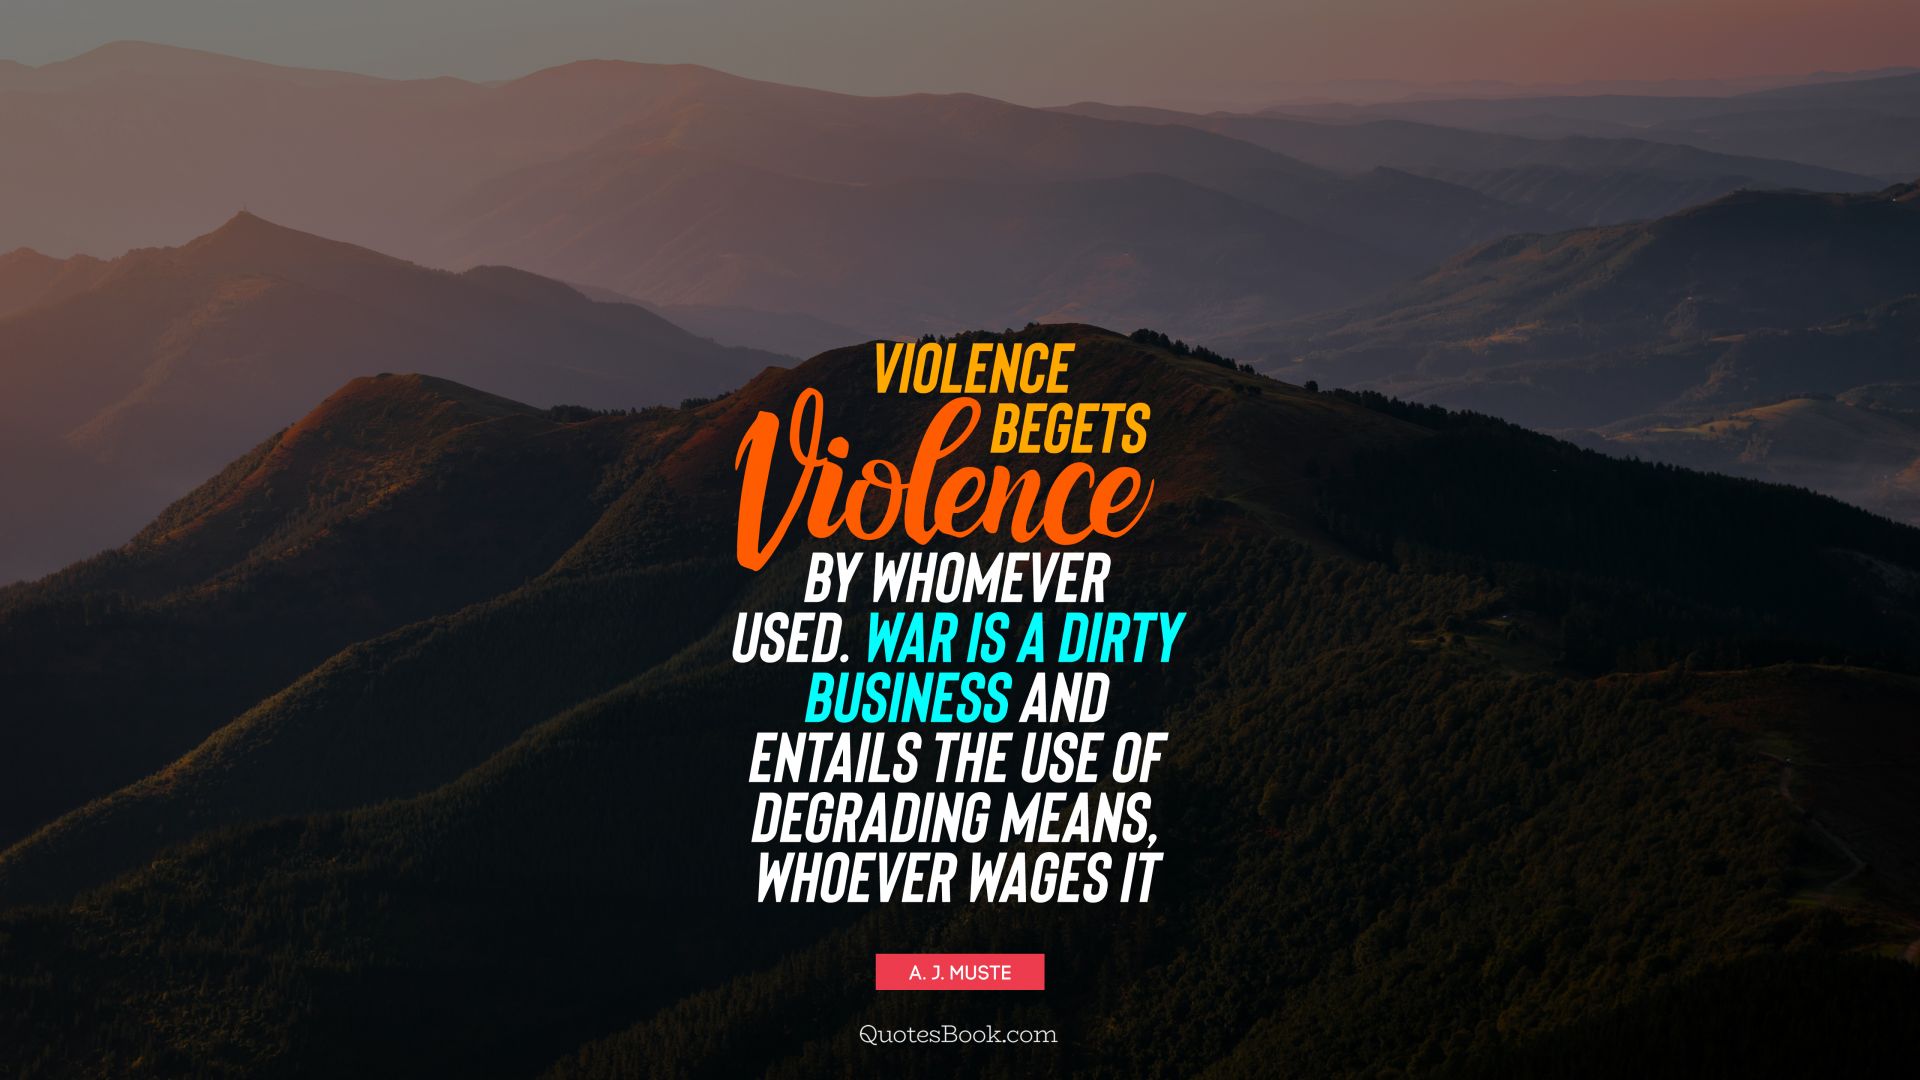 Violence begets violence by whomever used. War is a dirty business and entails the use of degrading means, whoever wages it. - Quote by A. J. Muste